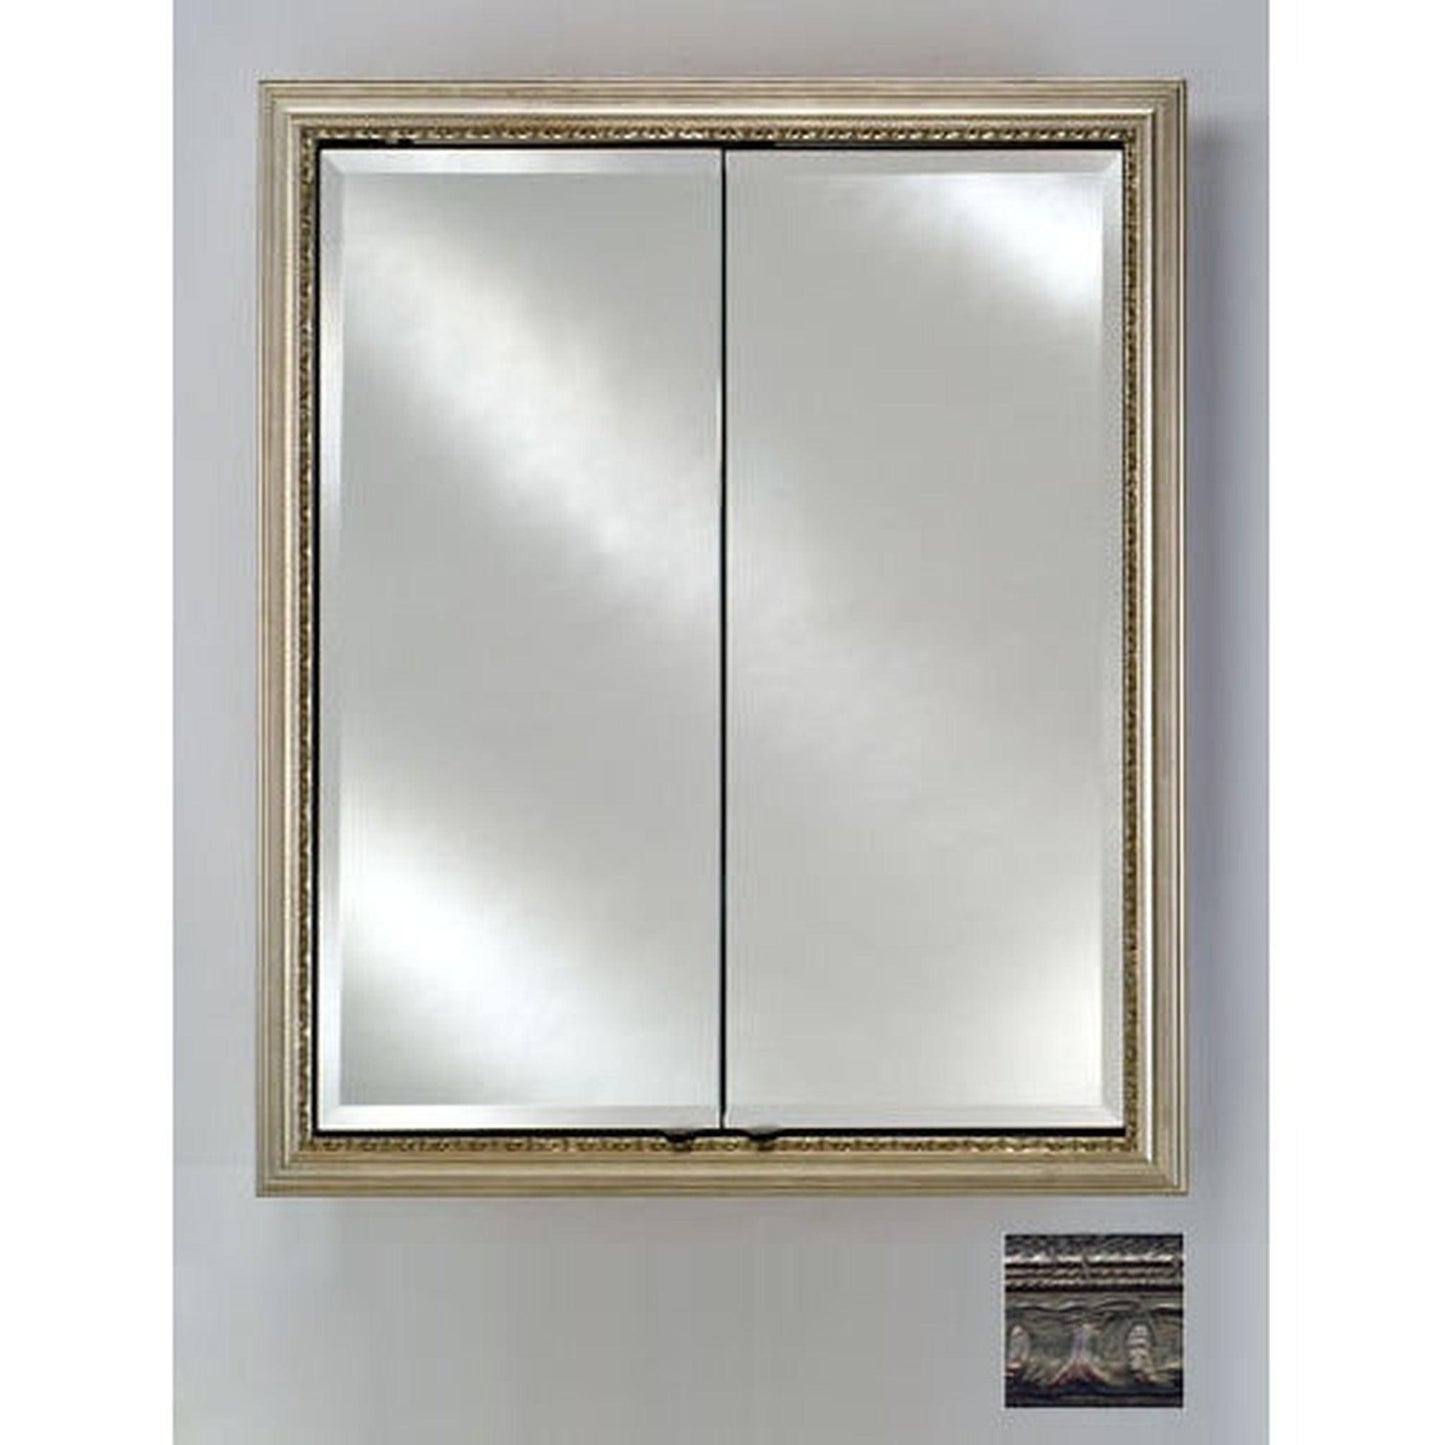 Afina Signature 24" x 30" Tuscany Antique Silver Recessed Double Door Medicine Cabinet With Beveled Edge Mirror